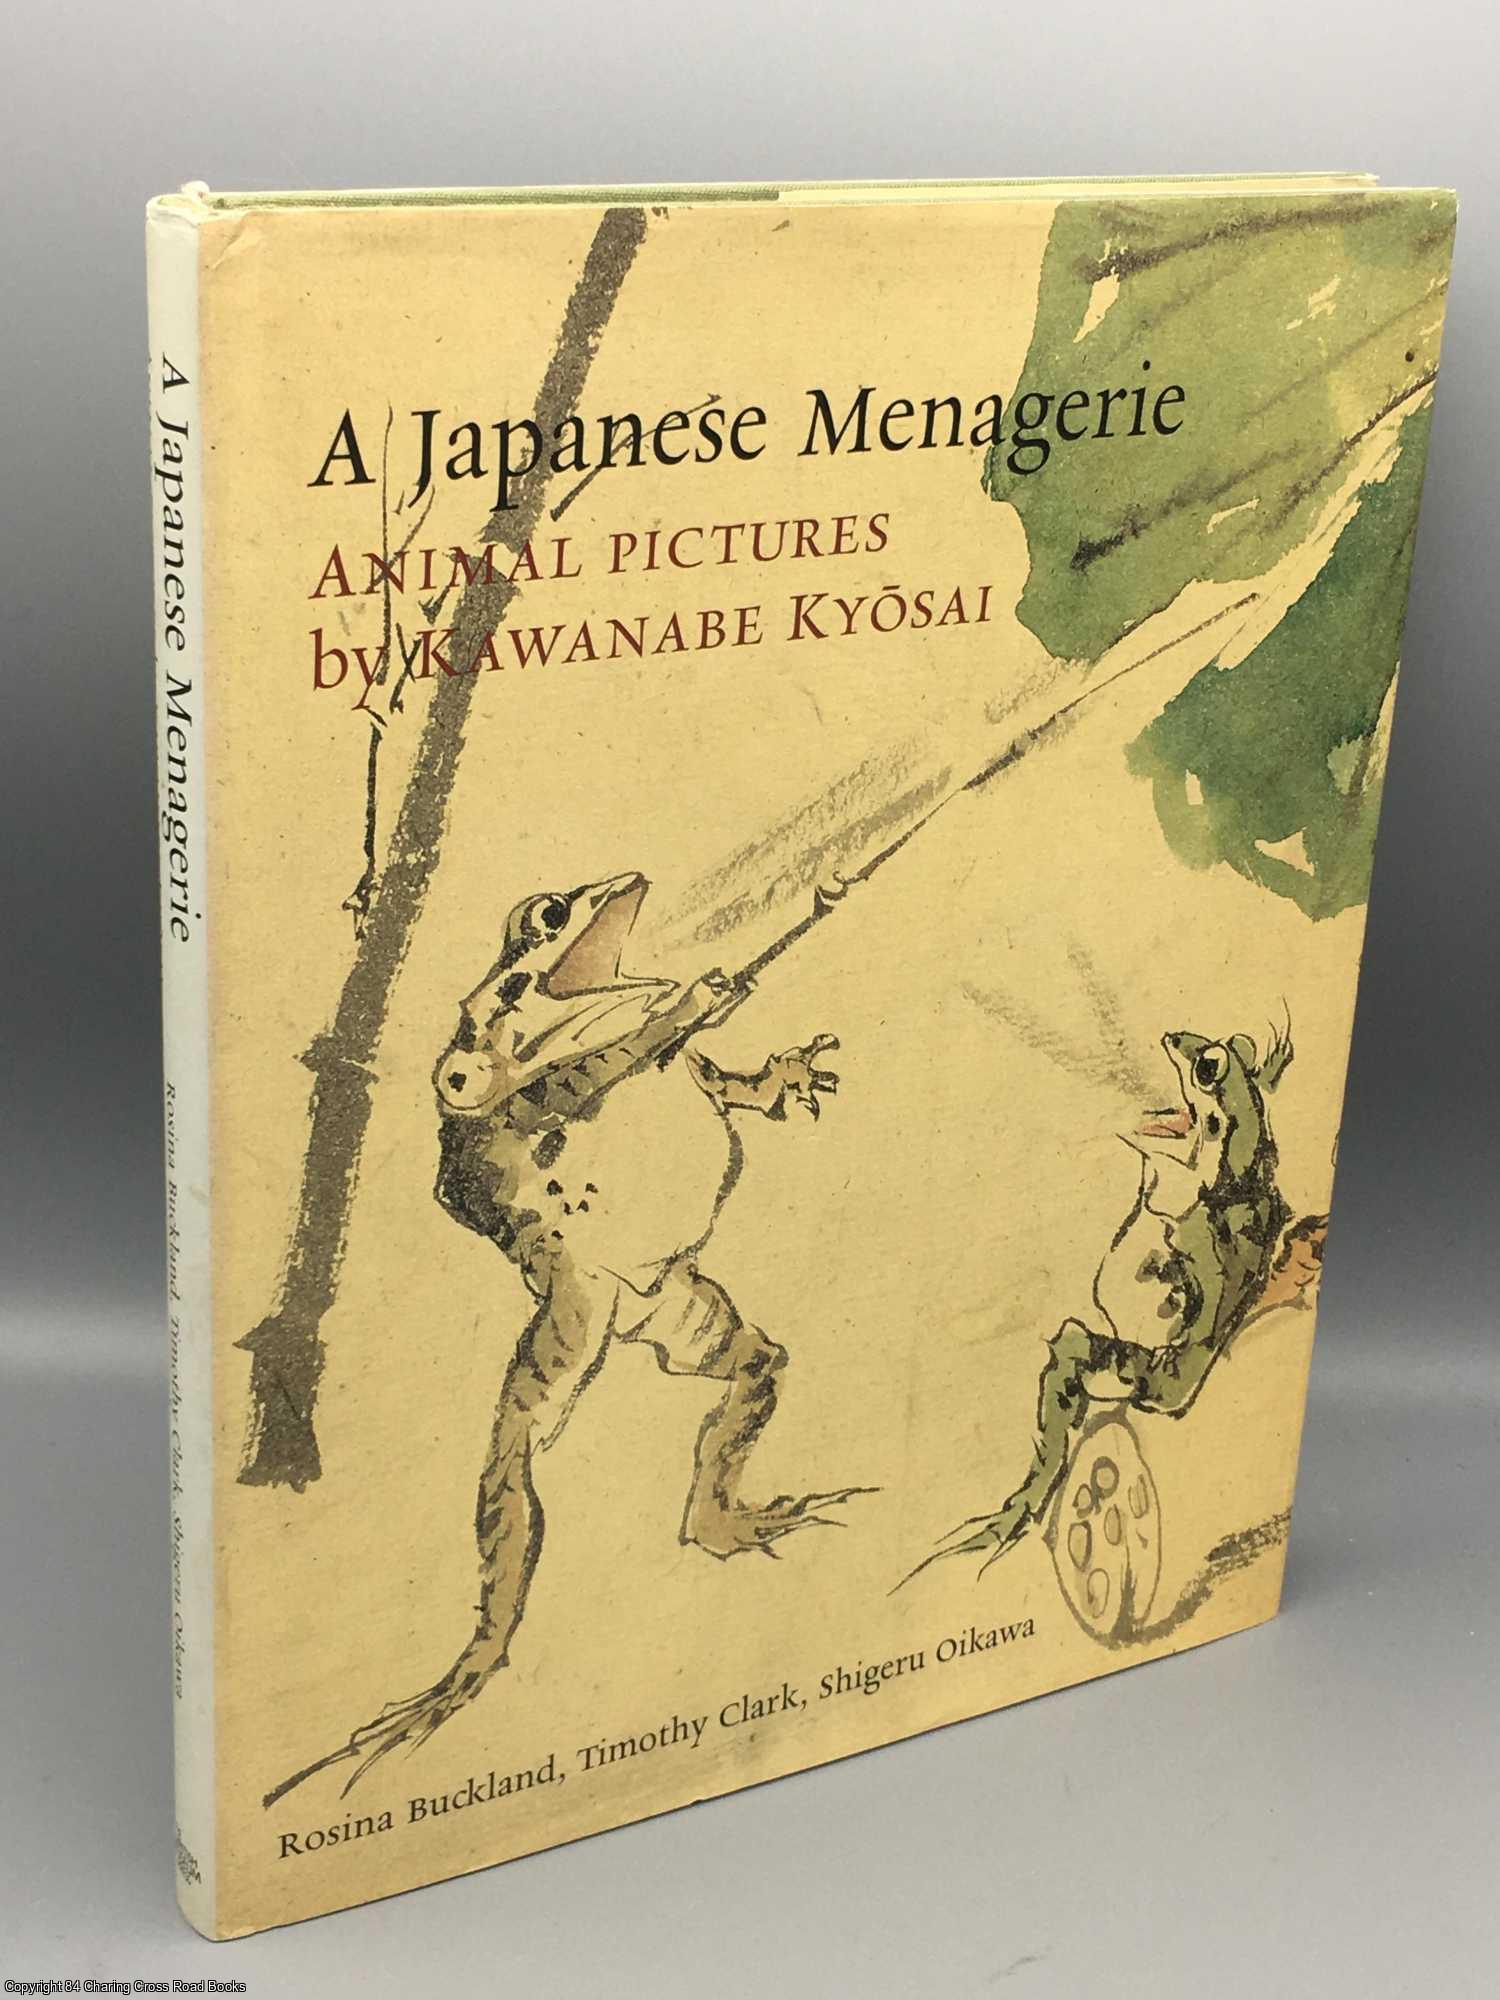 Buckland, Rosina; Clark, T J - A Japanese Menagerie: Animal Pictures by Kawanabe Kyosai